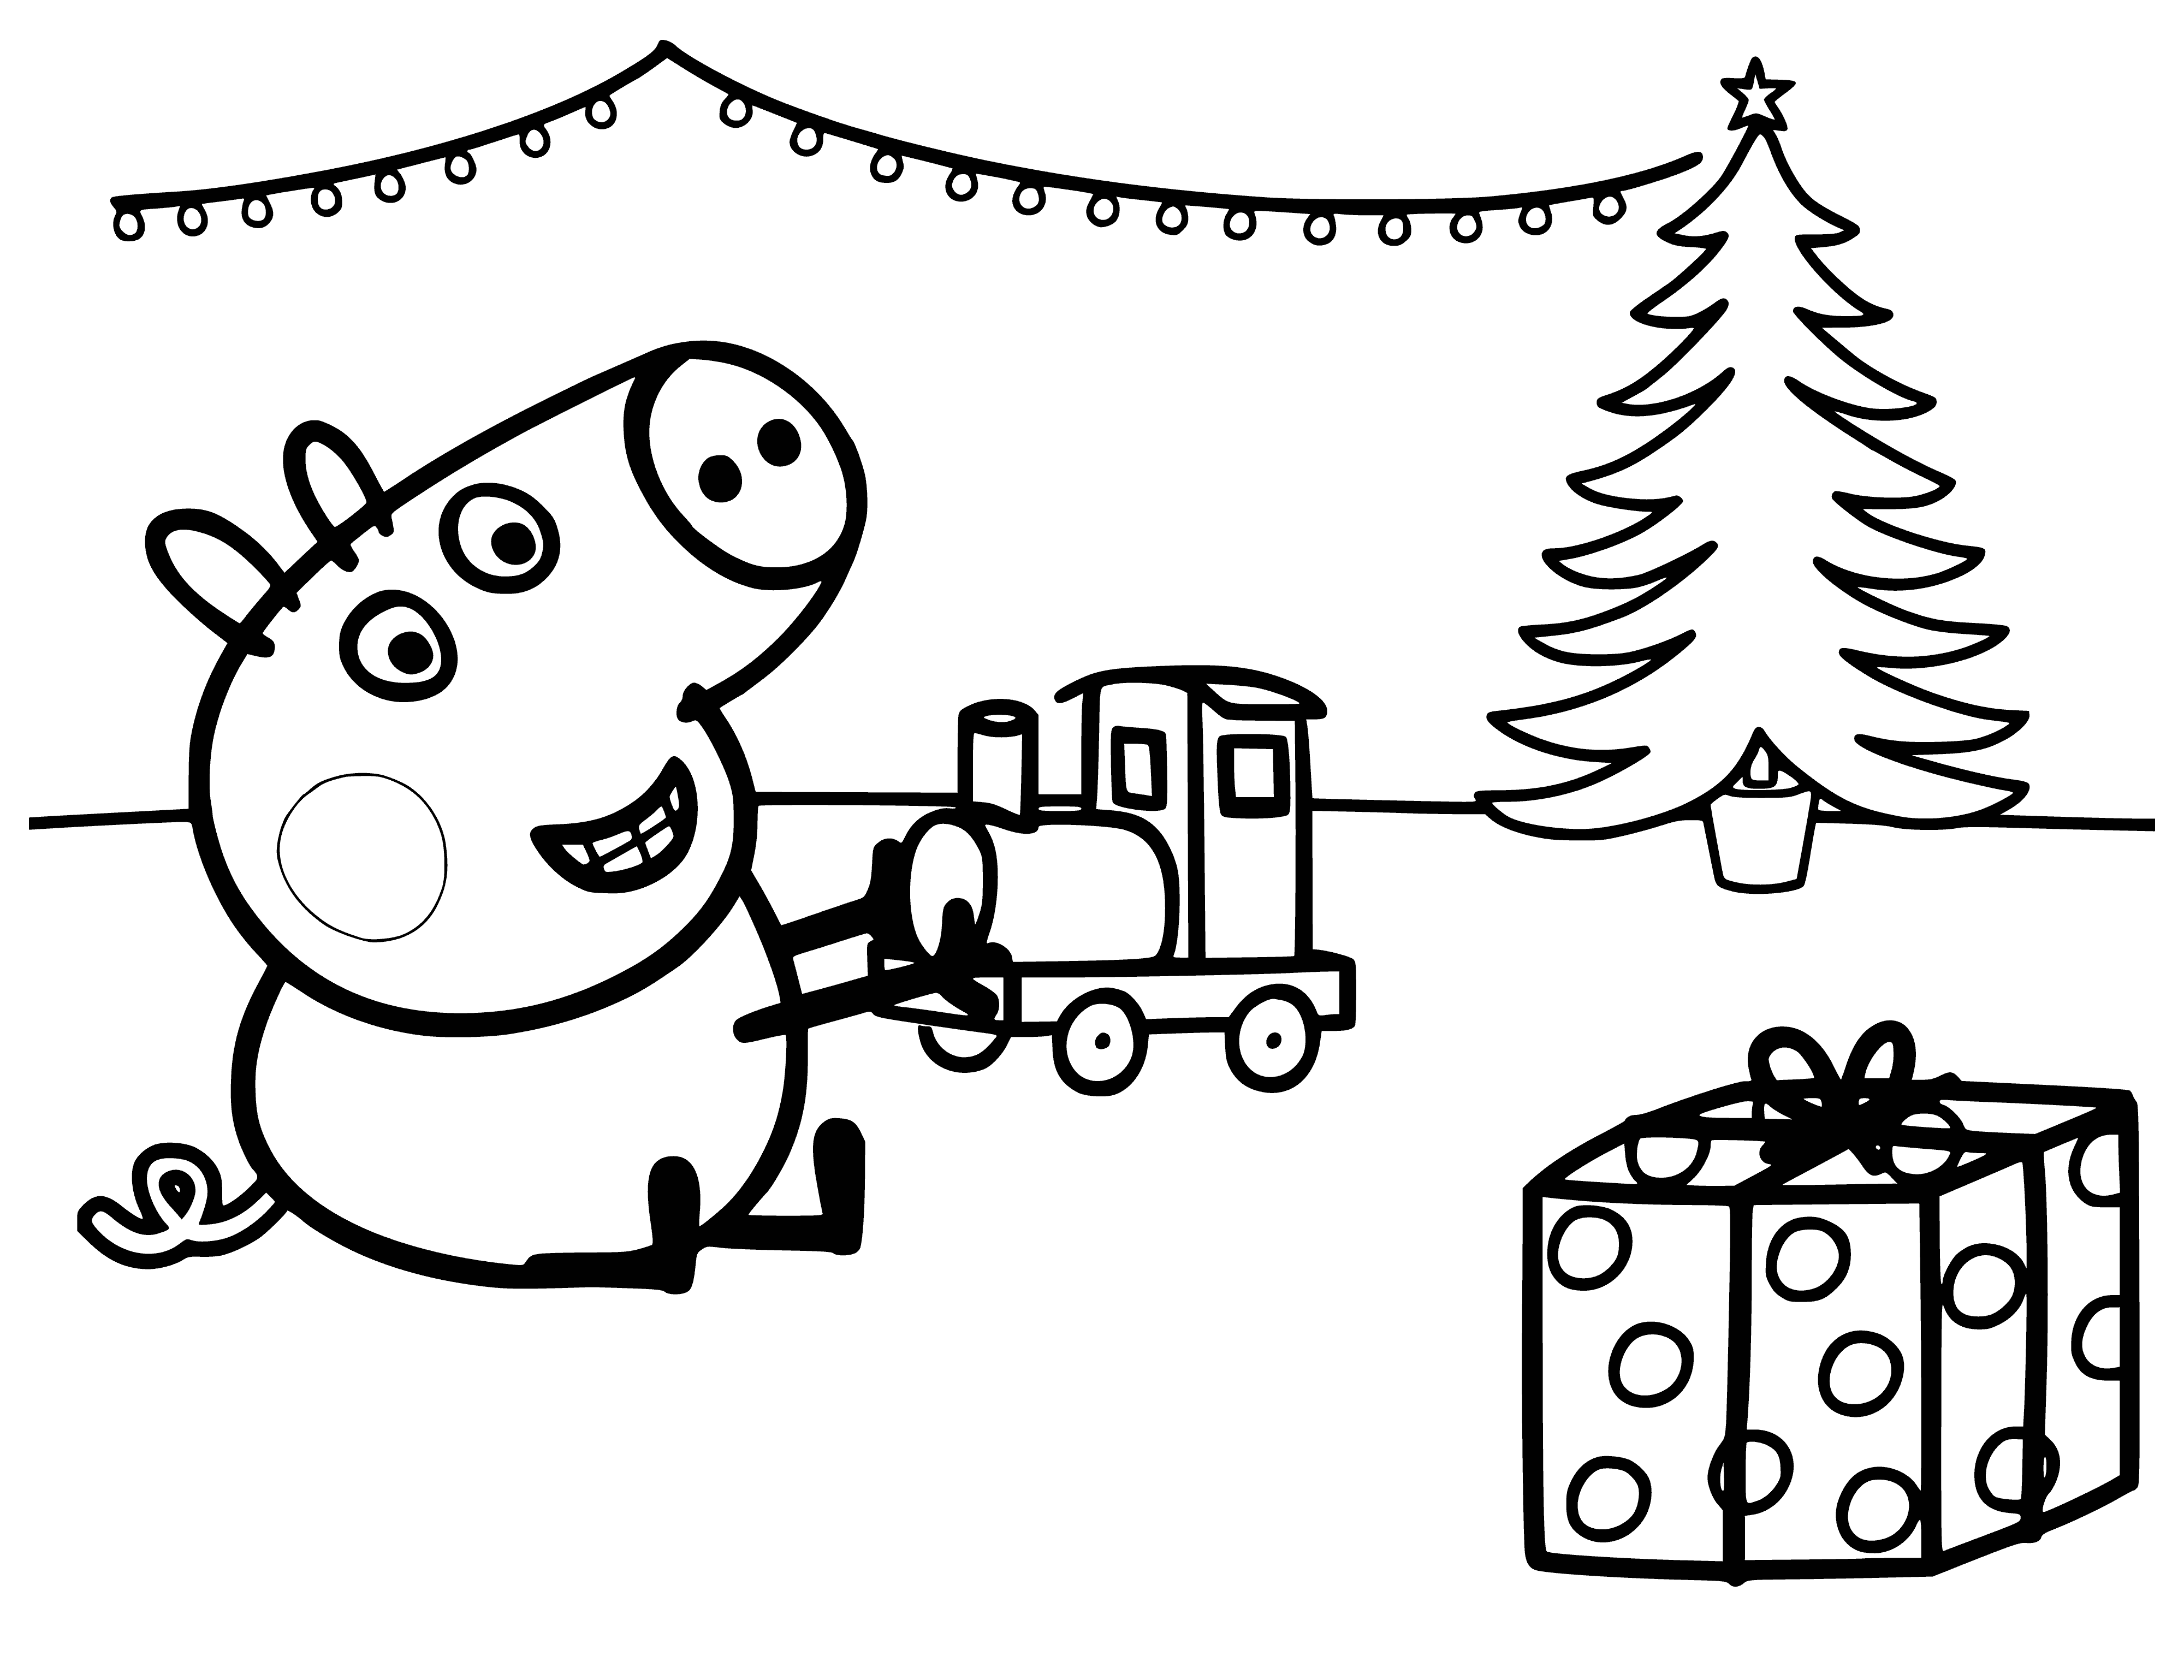 coloring page: Peppa Pig stands in front of a Xmas tree & presents surrounded by a banner "Gifts for the New Year". She holds a wrapped present & there's a table with a large cake on the left.